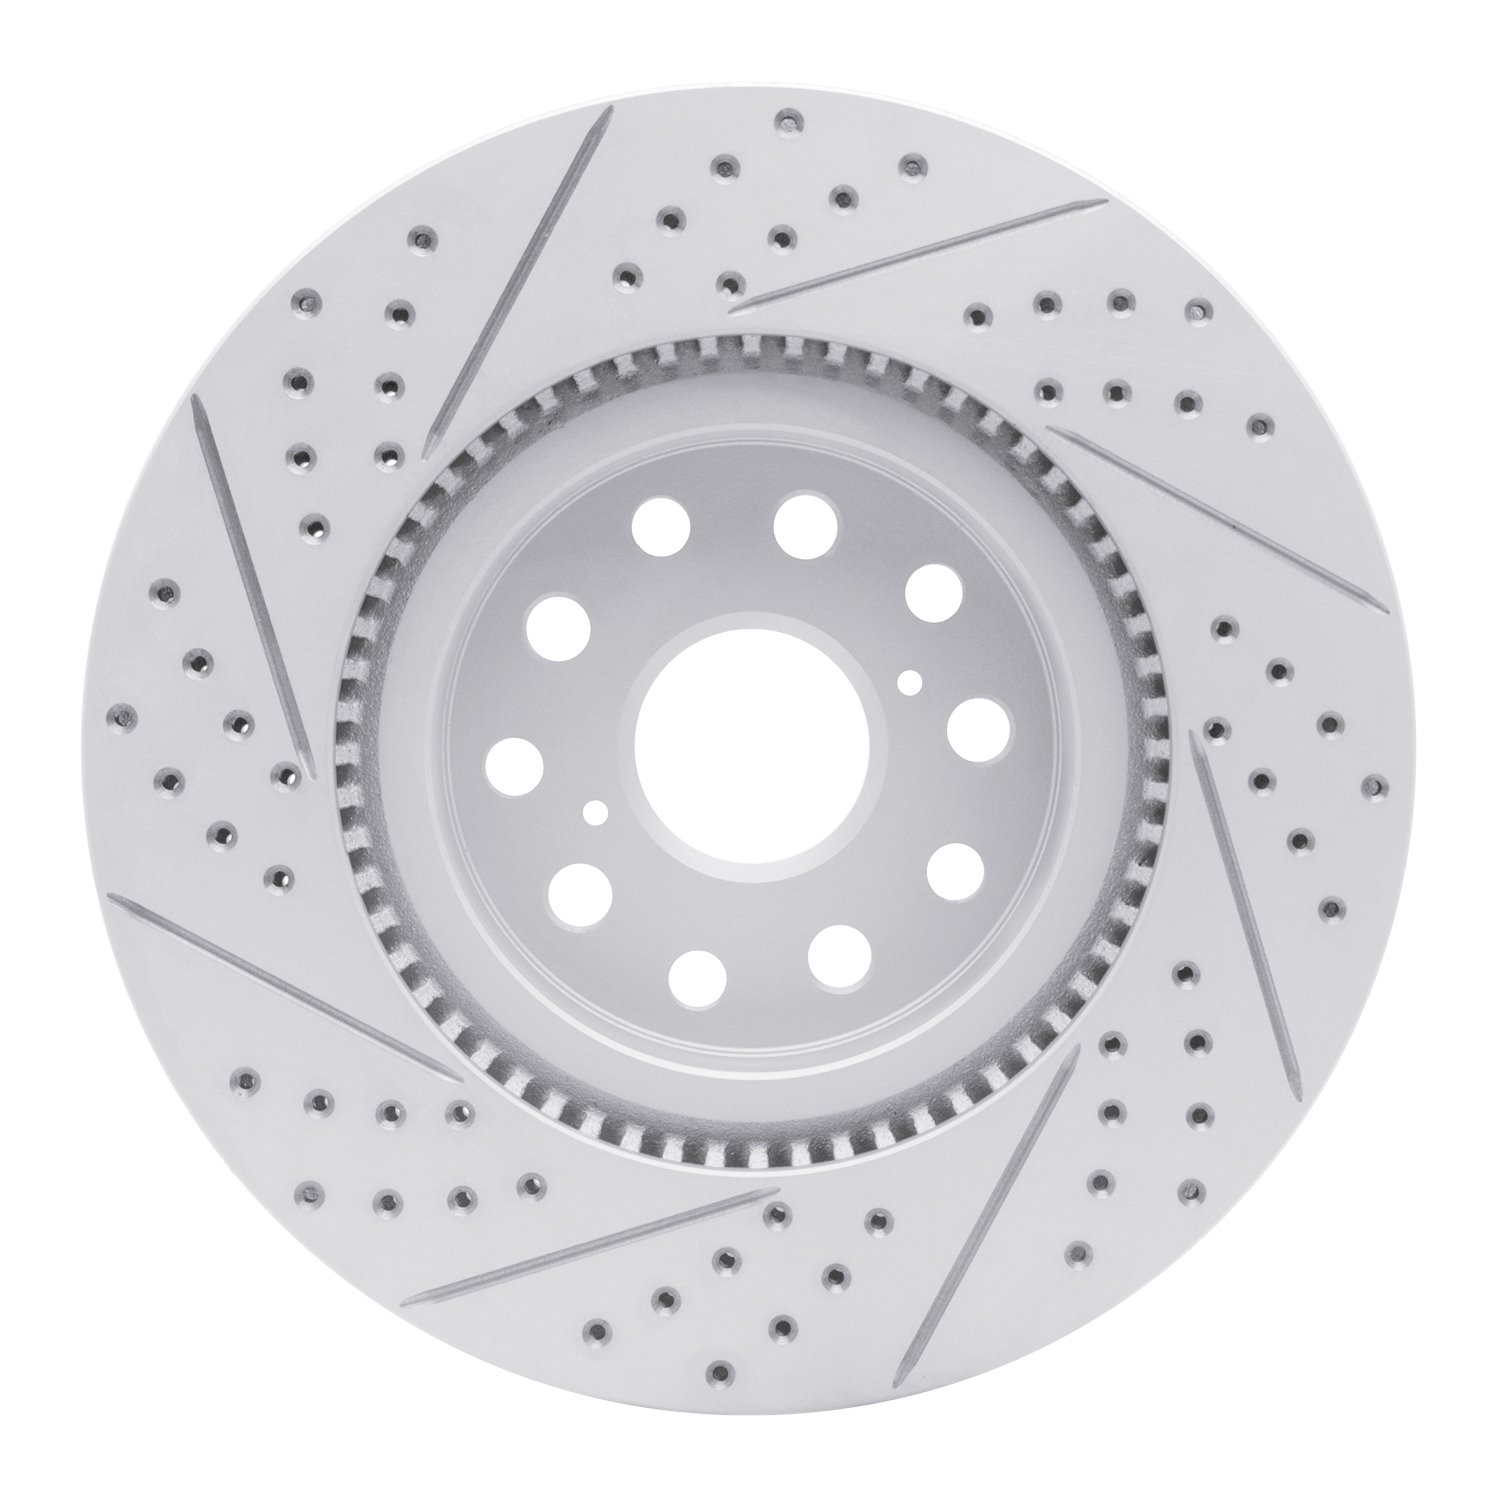 830-75017R Geoperformance Drilled/Slotted Brake Rotor, Fits Select Lexus/Toyota/Scion, Position: Front Right